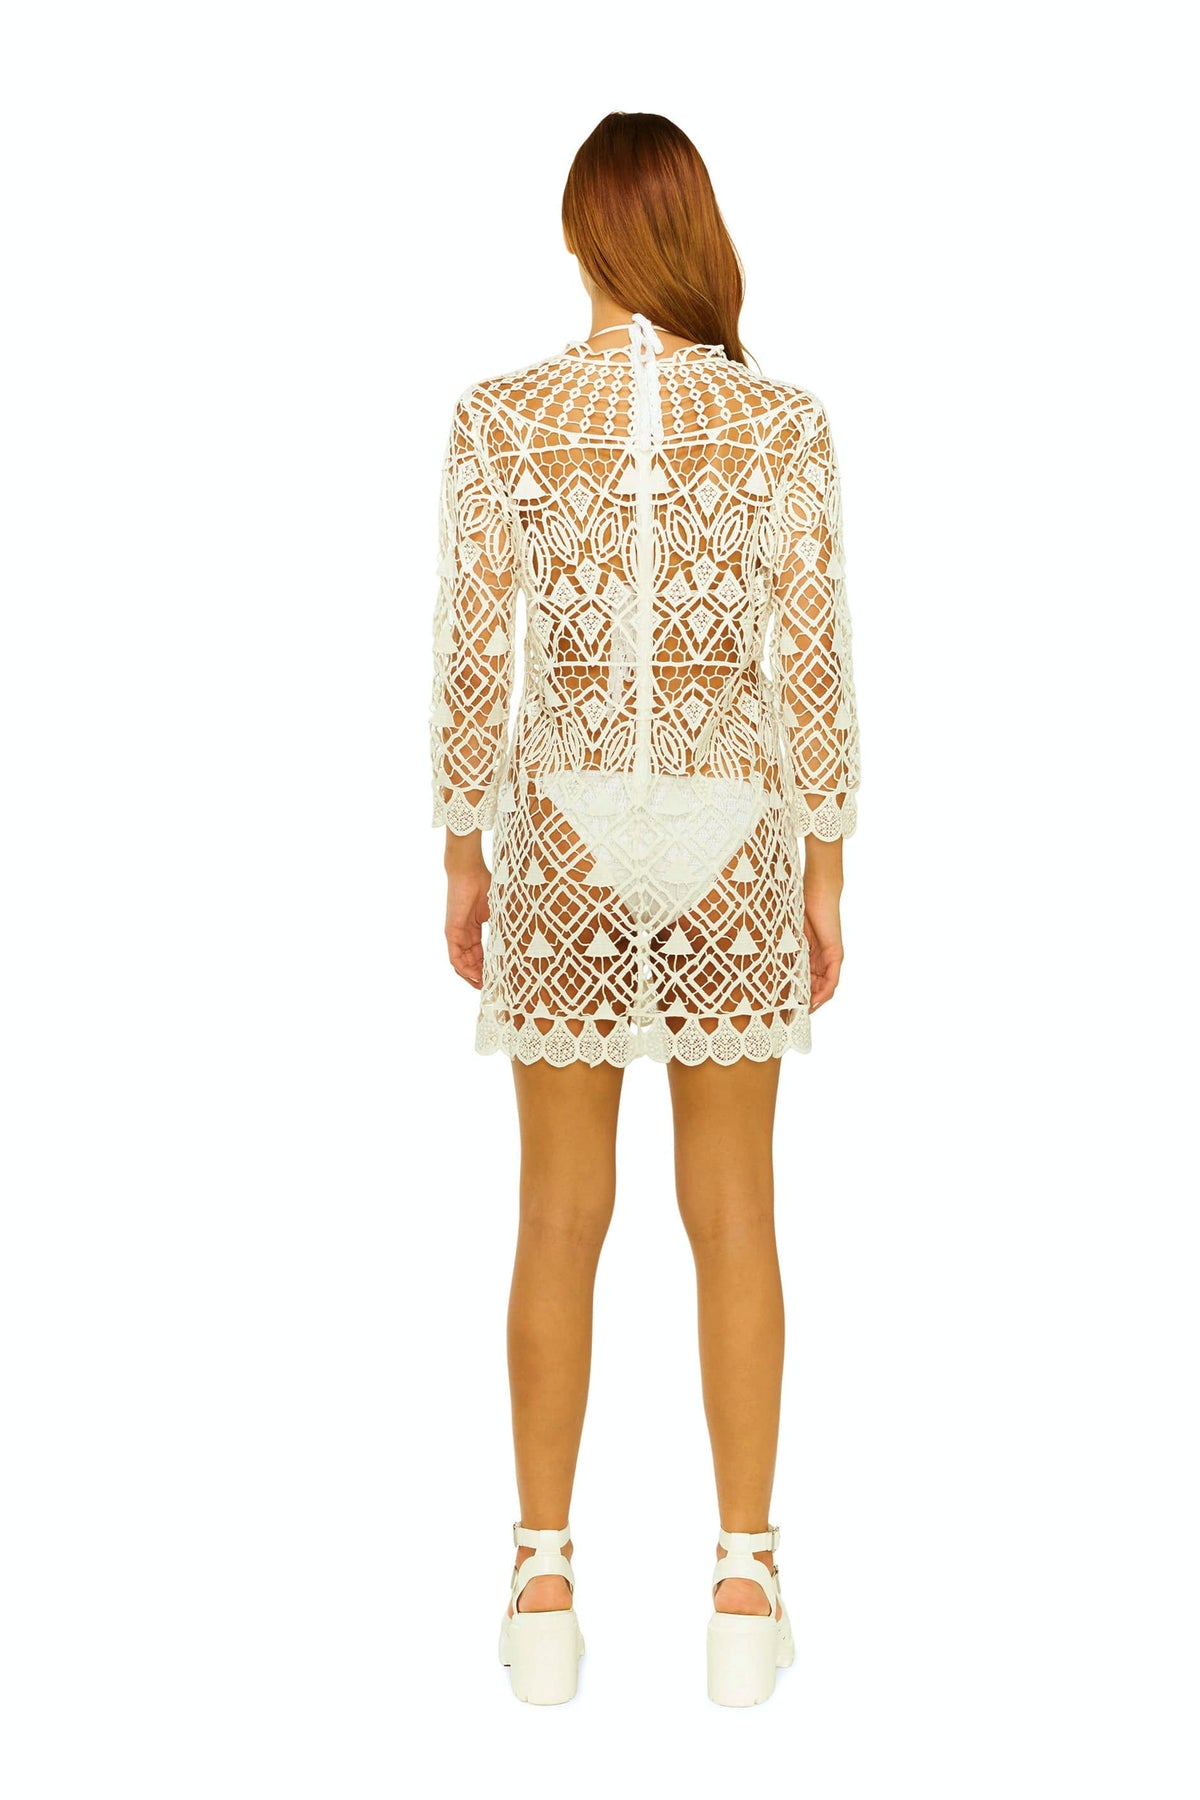 Lisa Maree Crochet (Land) SAFE WATERS Safe Waters - Crochet Lace Embroidered Coverup | Lisa Maree Online Store